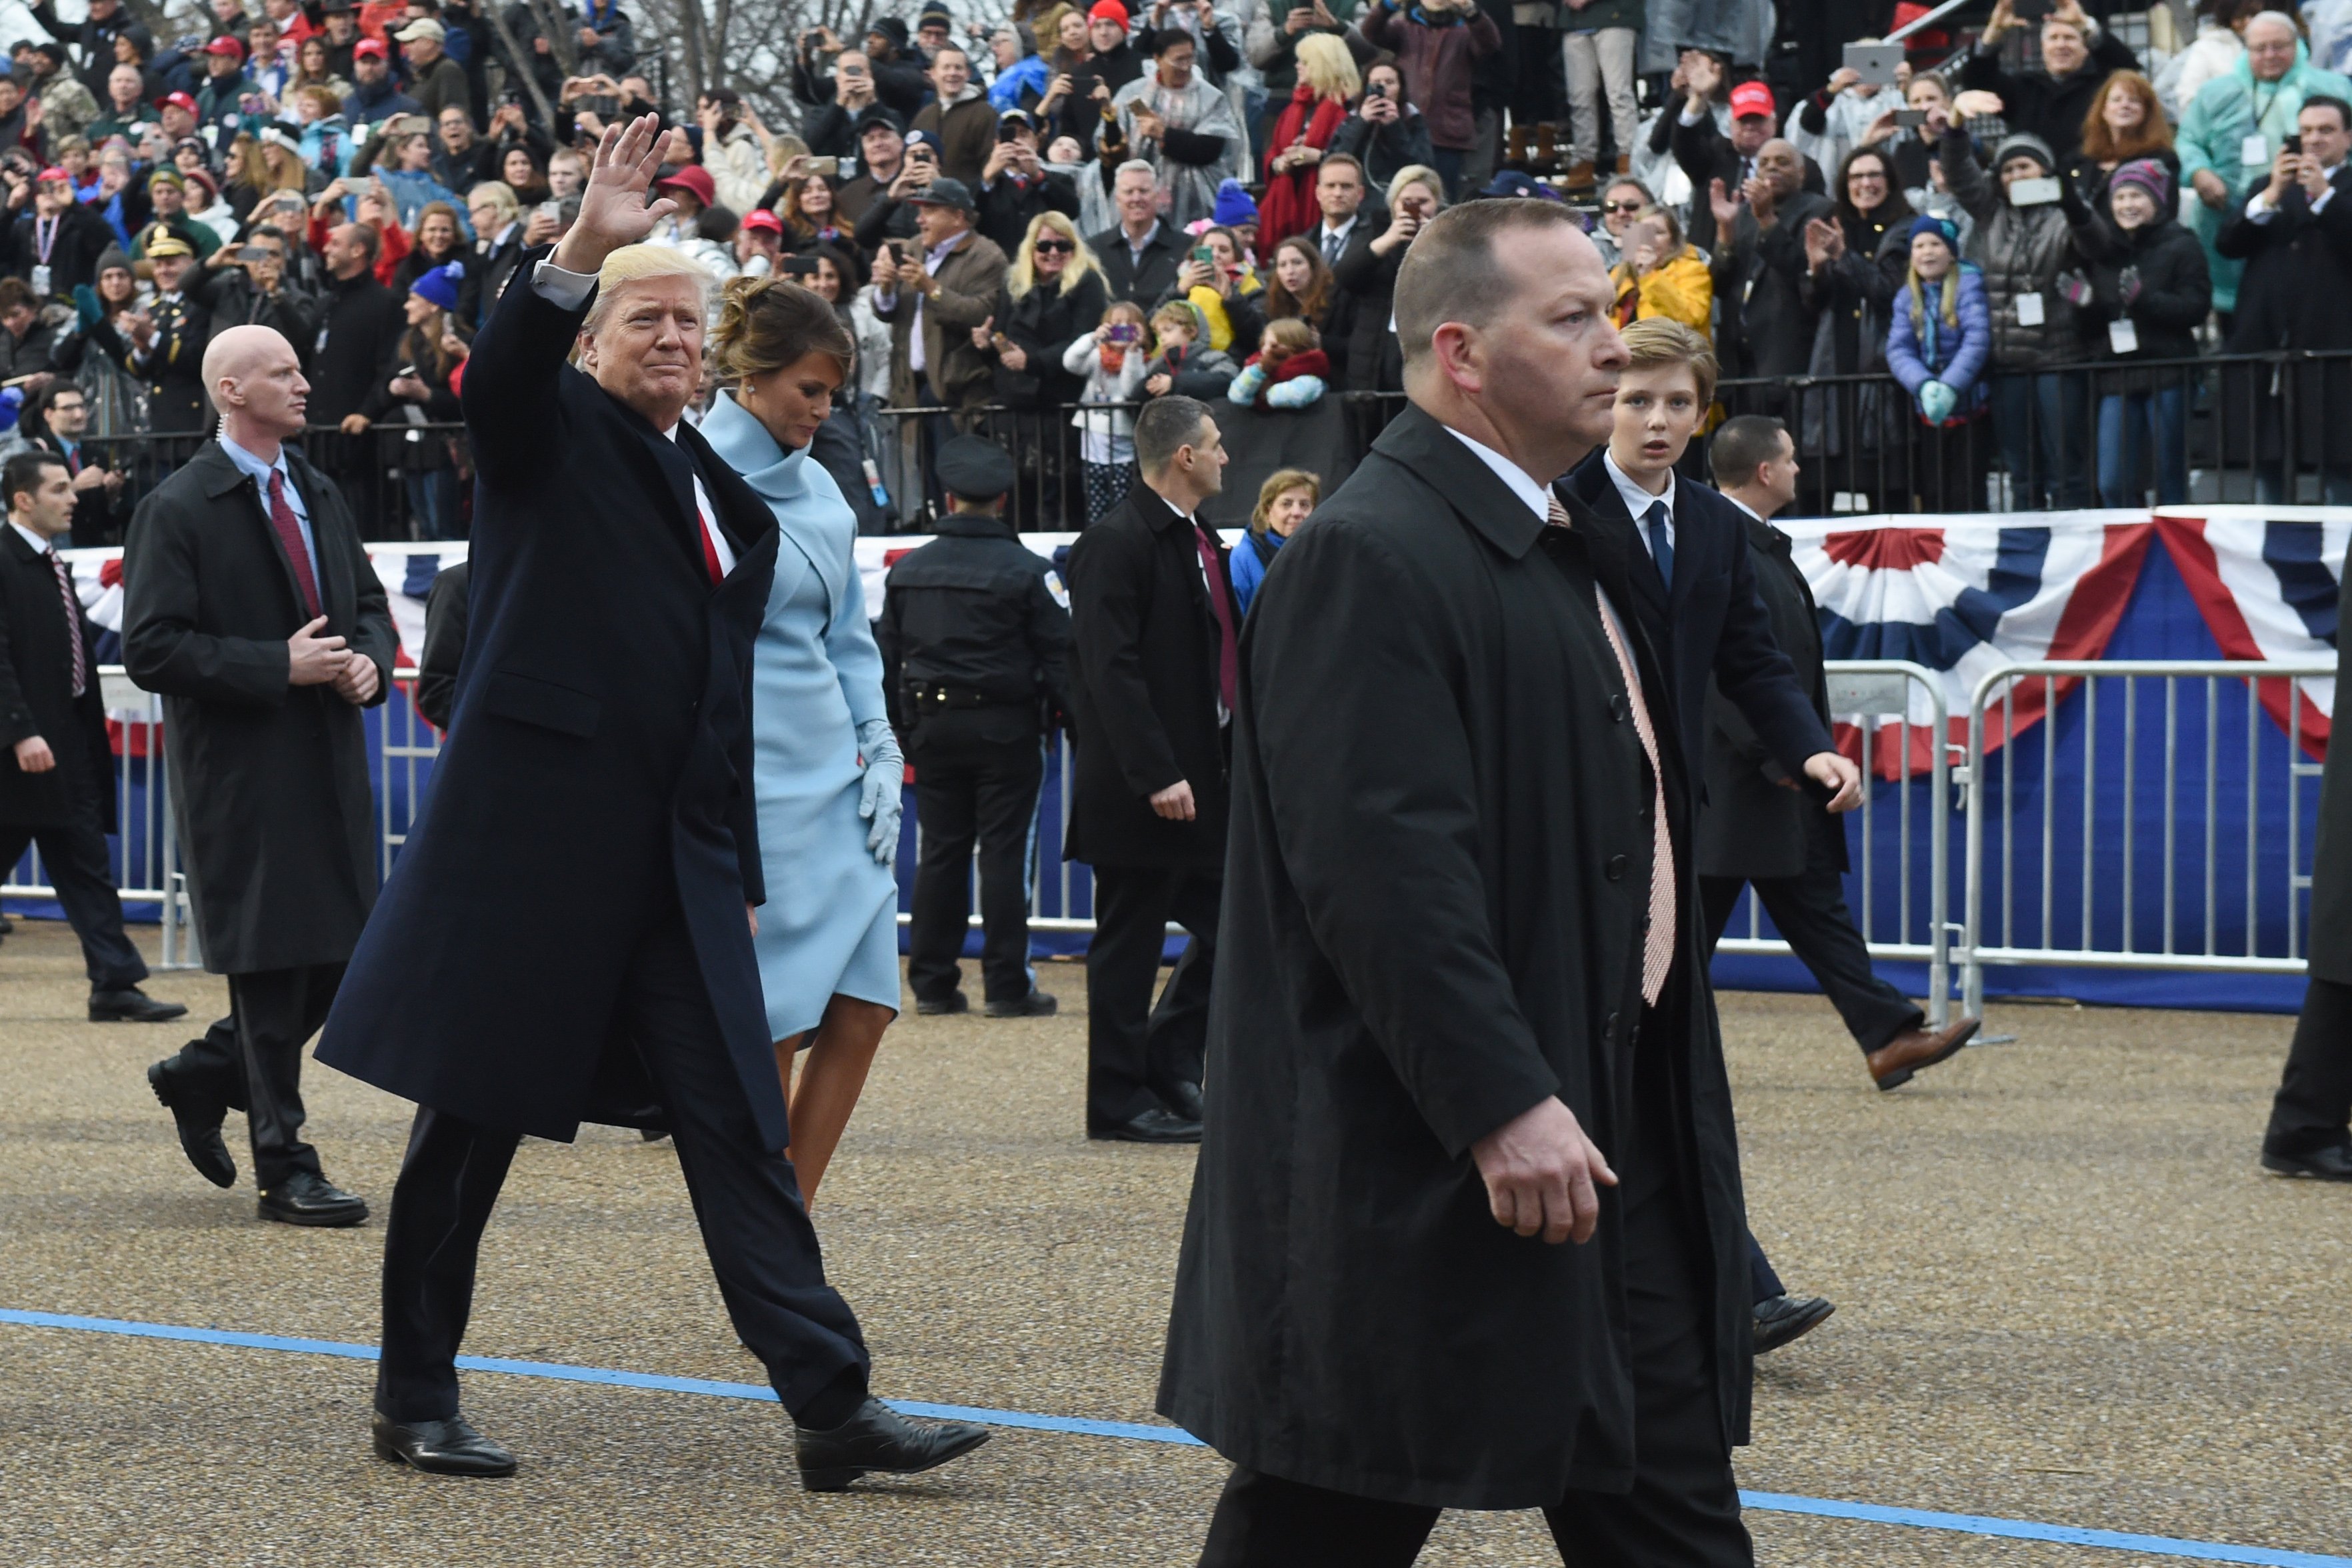 US President Donald Trump walks out of the car with his son Barron (R) and wife Melania surrounded by Secret Service officers at the White House as the presidential inaugural parade winds through the nation's capital on January 20, 2017 in Washington, DC. TIMOTHY A. CLARY/AFP/Getty Images